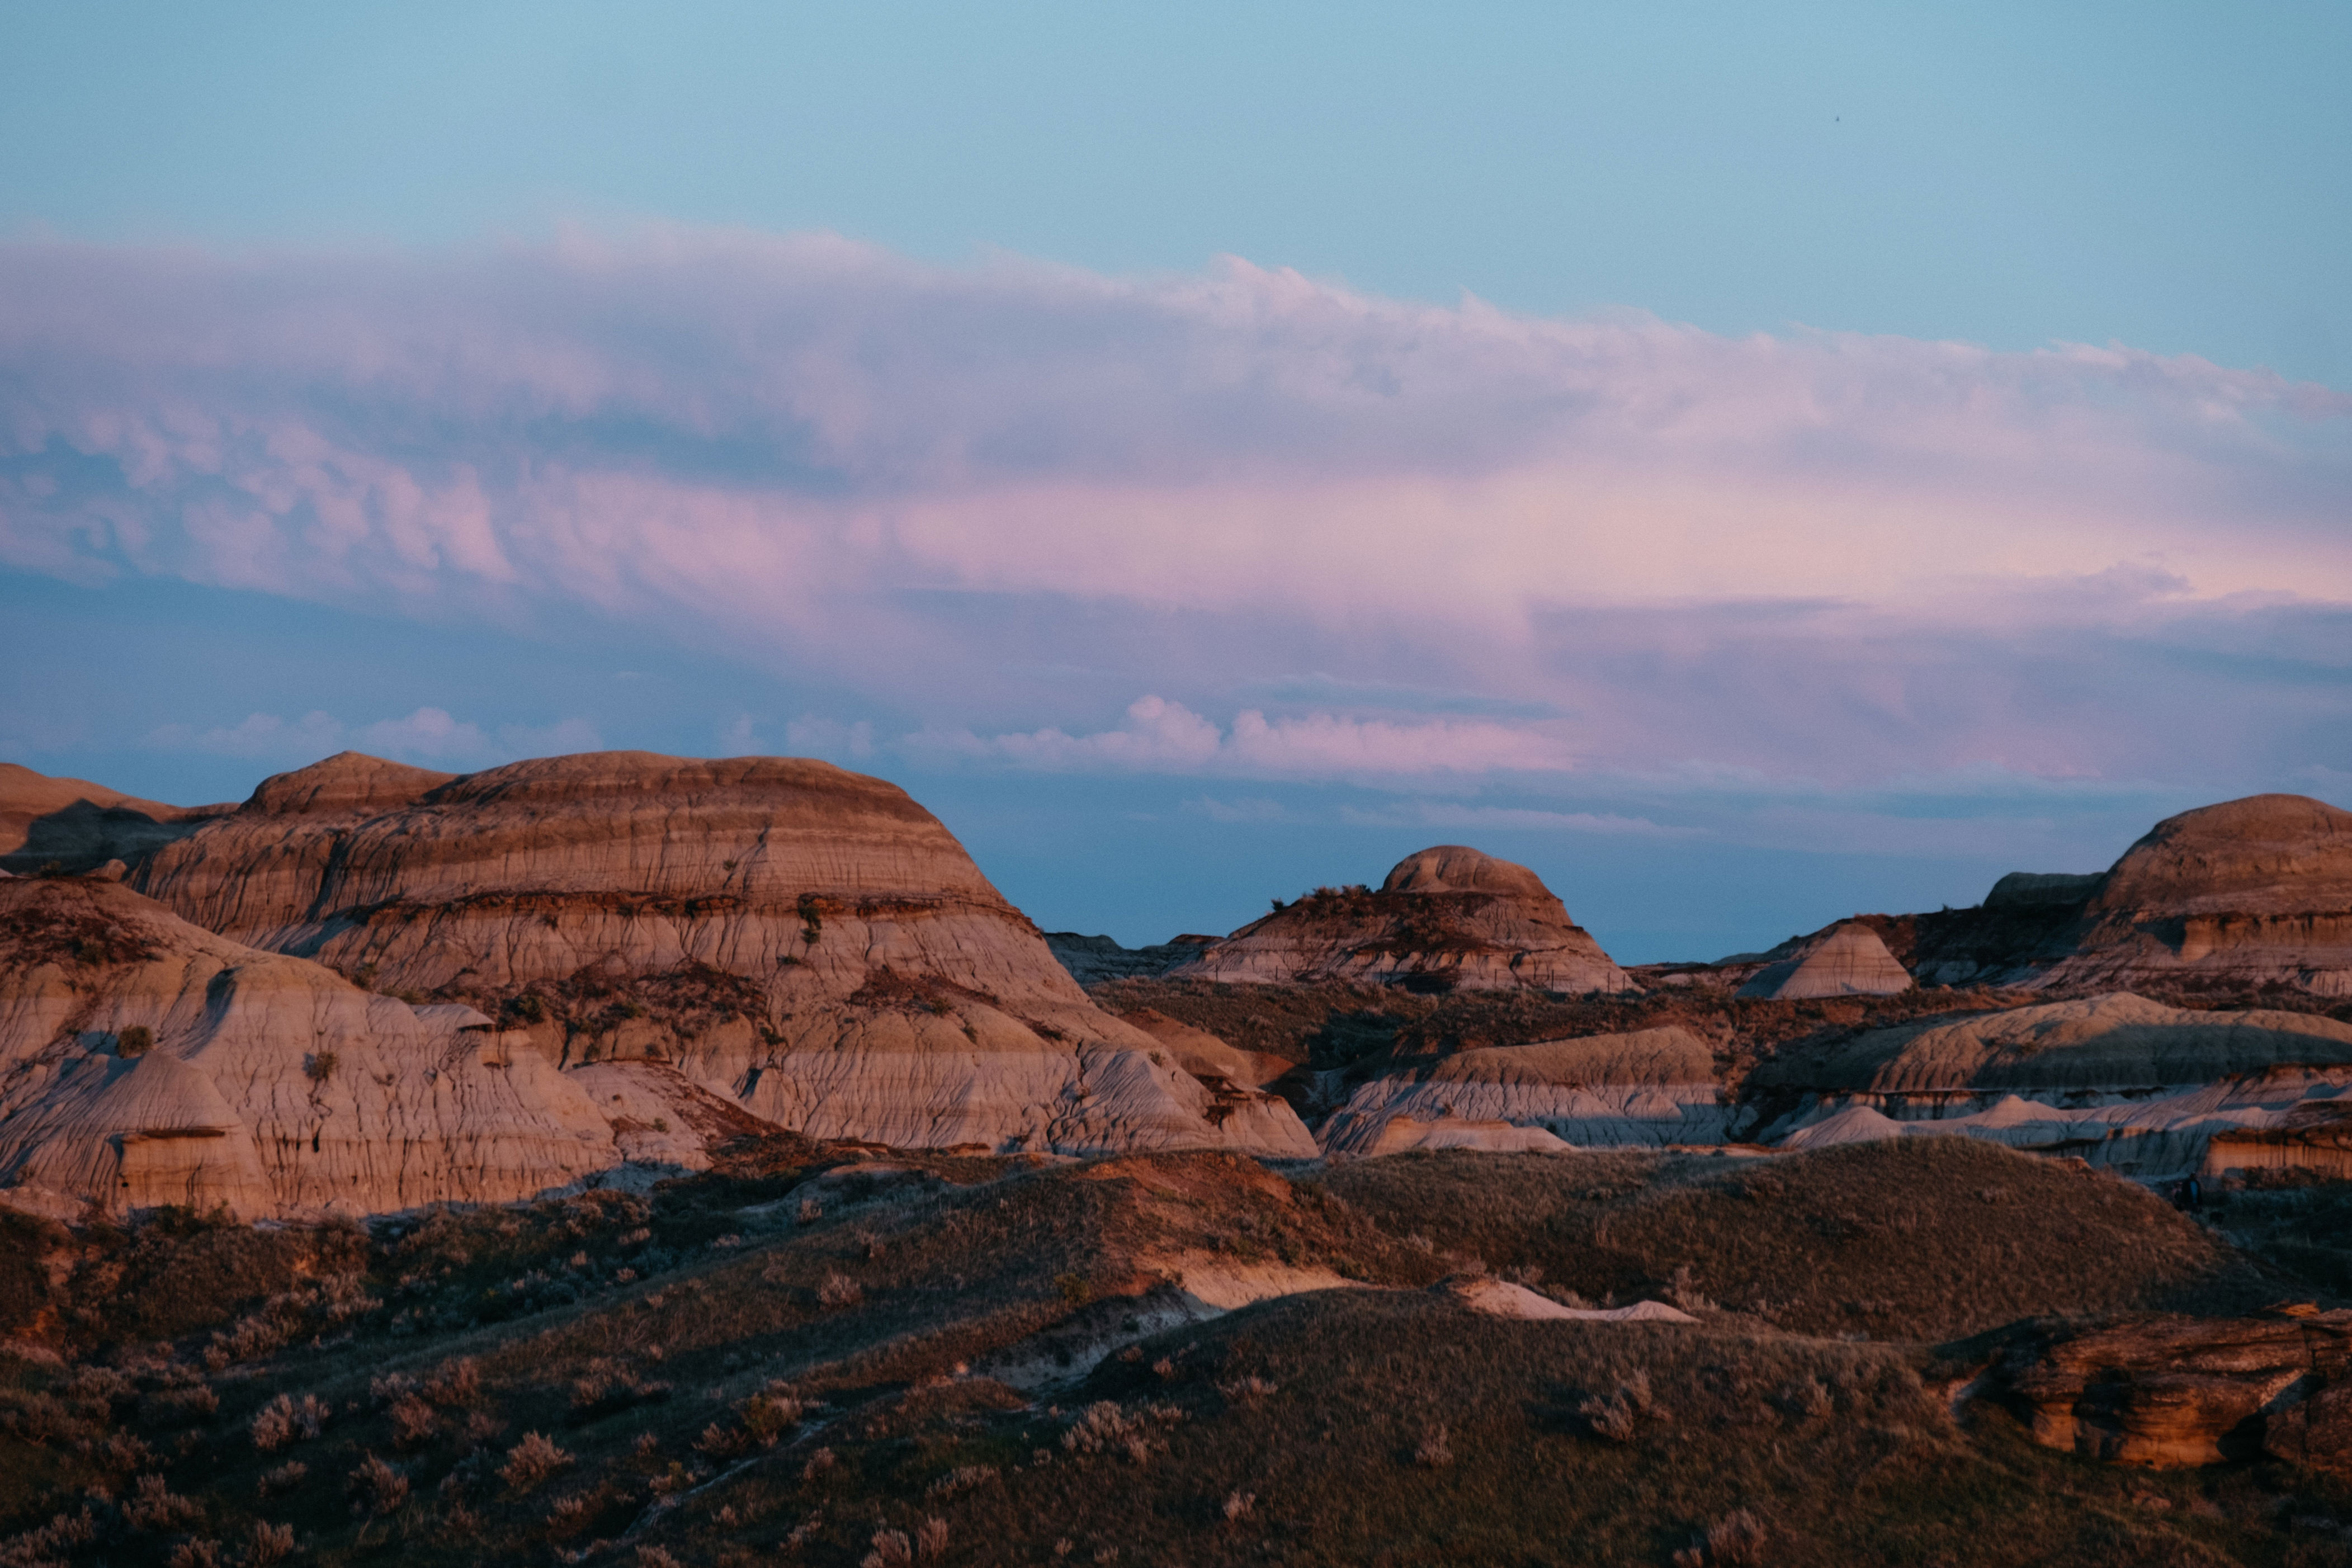 <p>The Alberta Badlands offer a unique landscape that unearths a prehistoric past. The stunning rock formations are a favorite among photographers from all over the world.</p><p>The Royal Tyrrell Museum holds the world’s largest collection of dinosaur fossils.</p><p><strong>Highlights:</strong> Fossil Museum, Hoodoos, Drumheller</p><p><strong>Activities to Enjoy:</strong> Hiking, photography, educational tours</p>